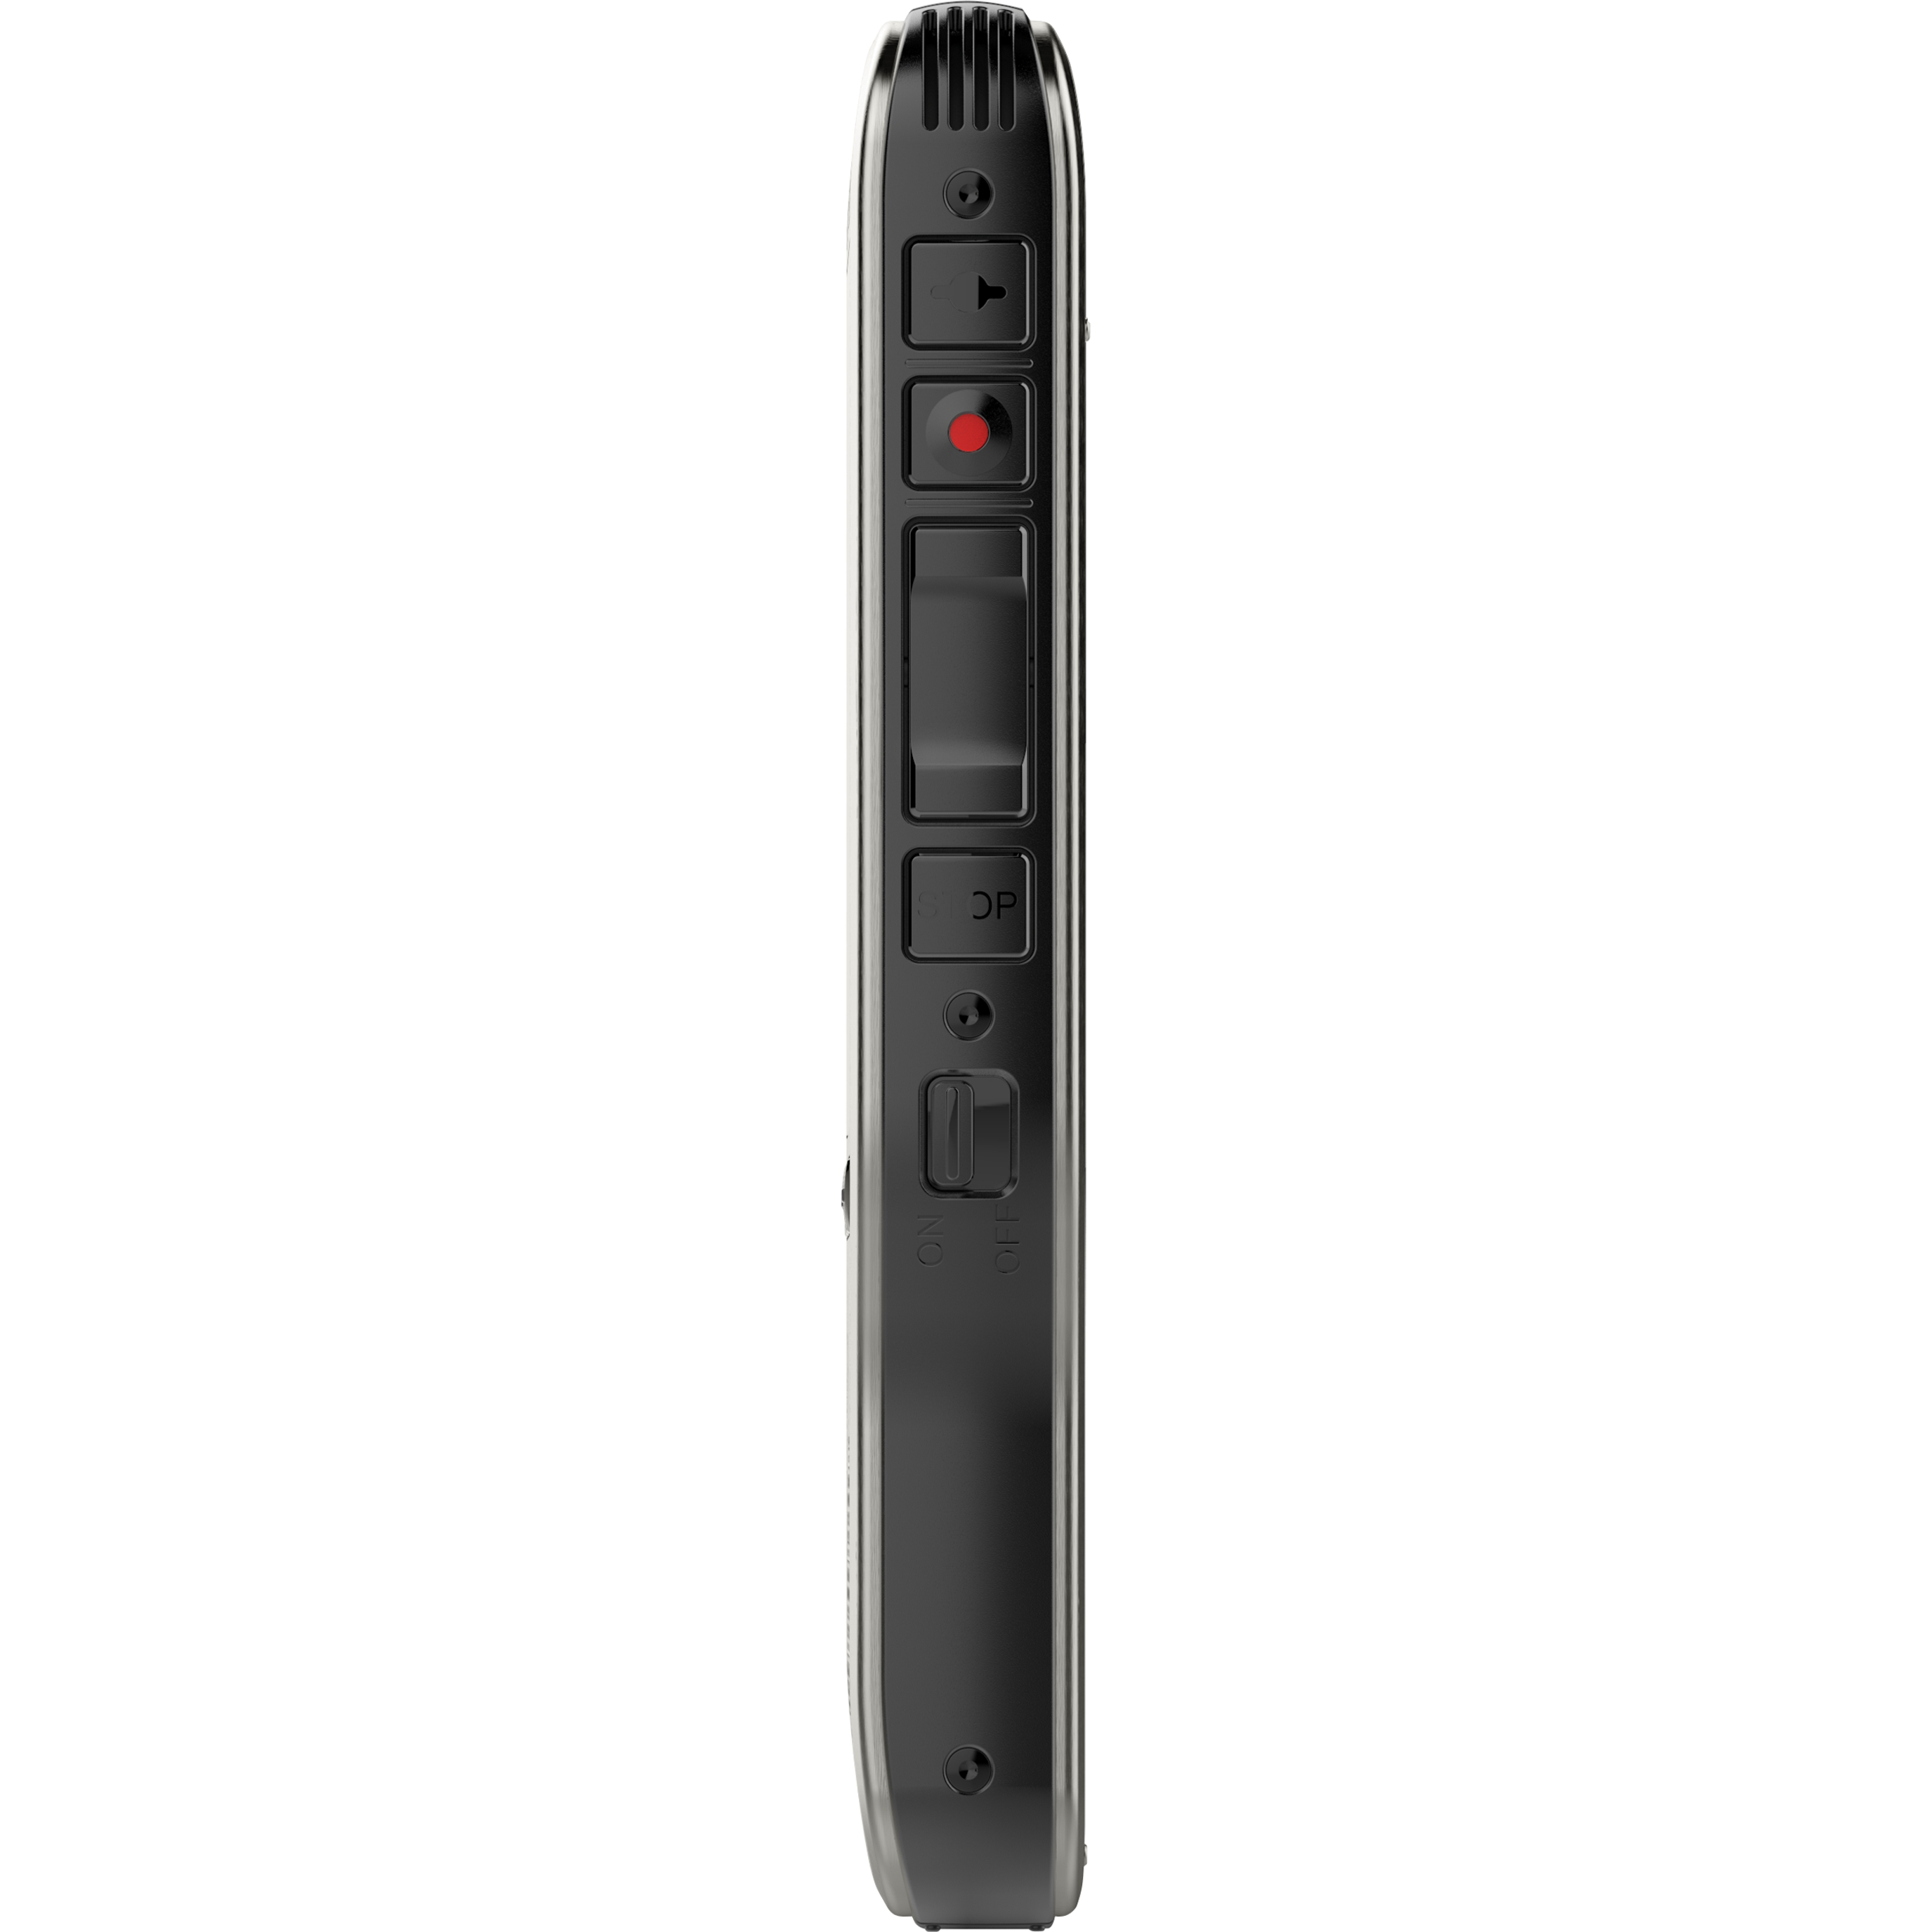 Philips Pocket Memo Digital Voice Recorder with LCD Display, DPM6000 - image 5 of 7